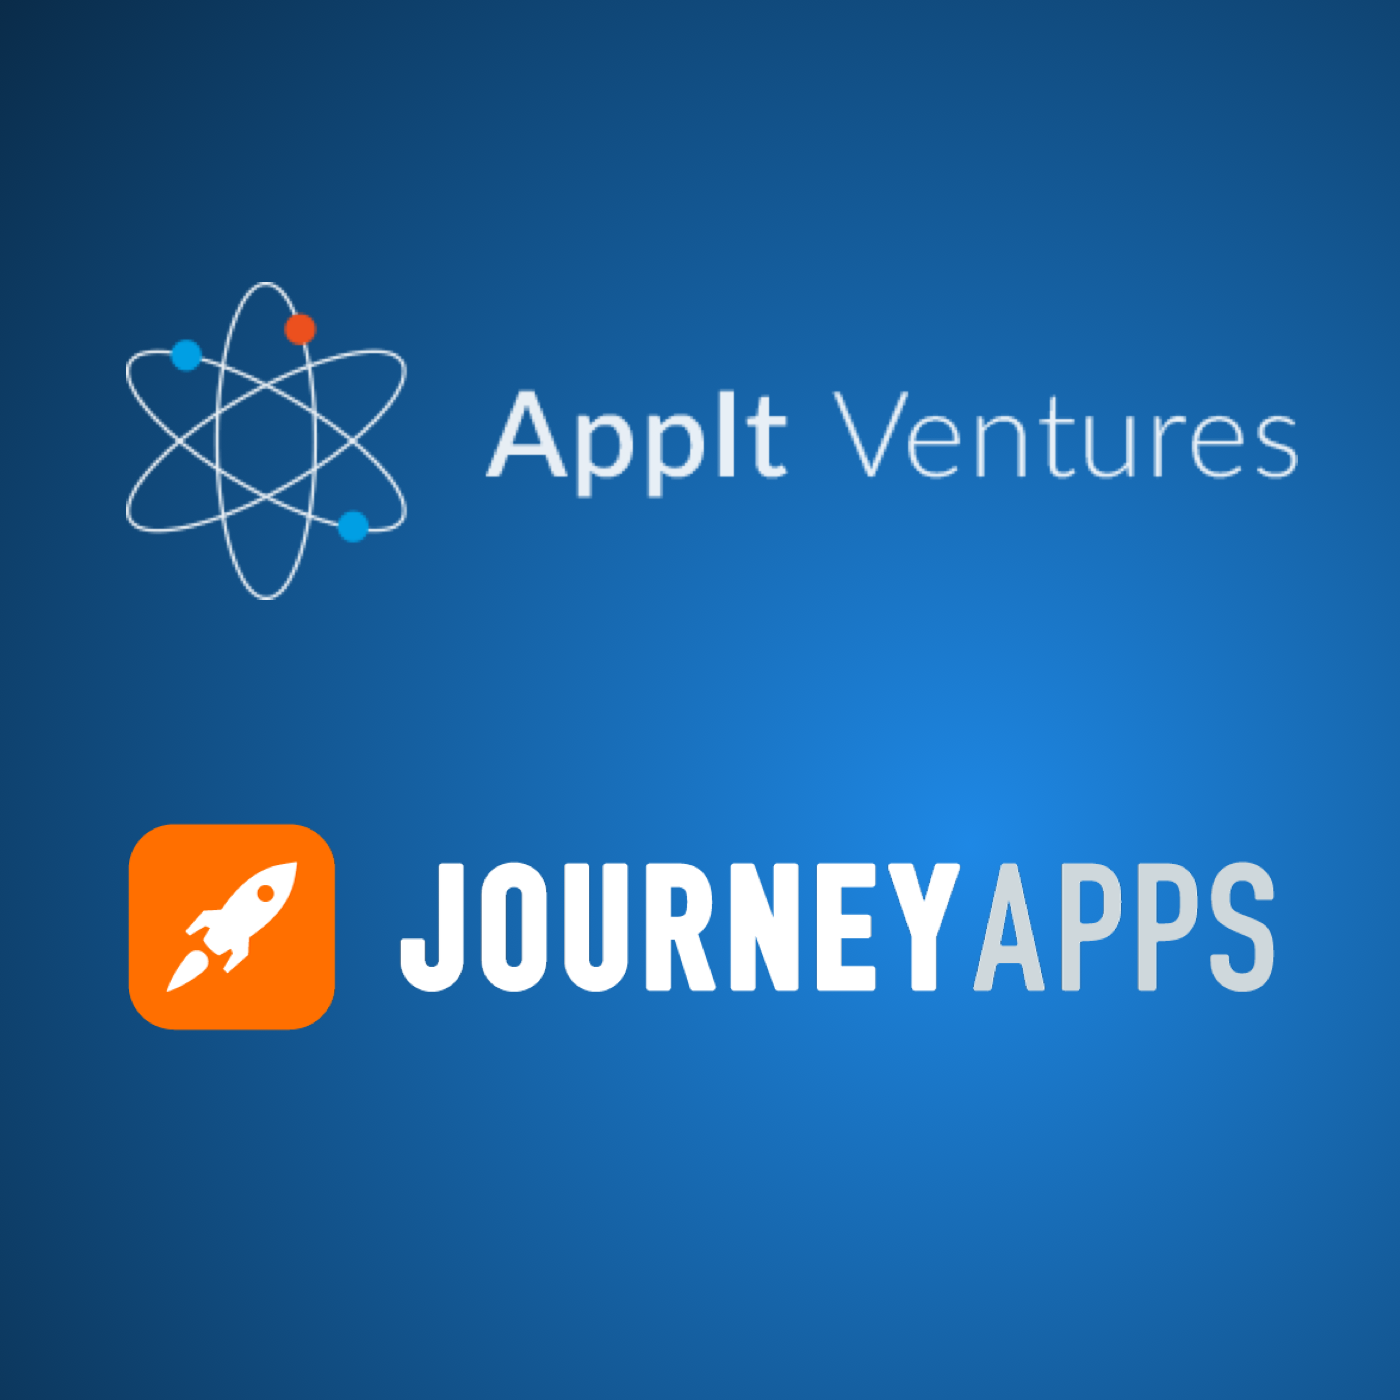 AppIt Ventures and JourneyApps Announce Strategic Partnership to Accelerate the Delivery of Mission-Critical Custom Apps